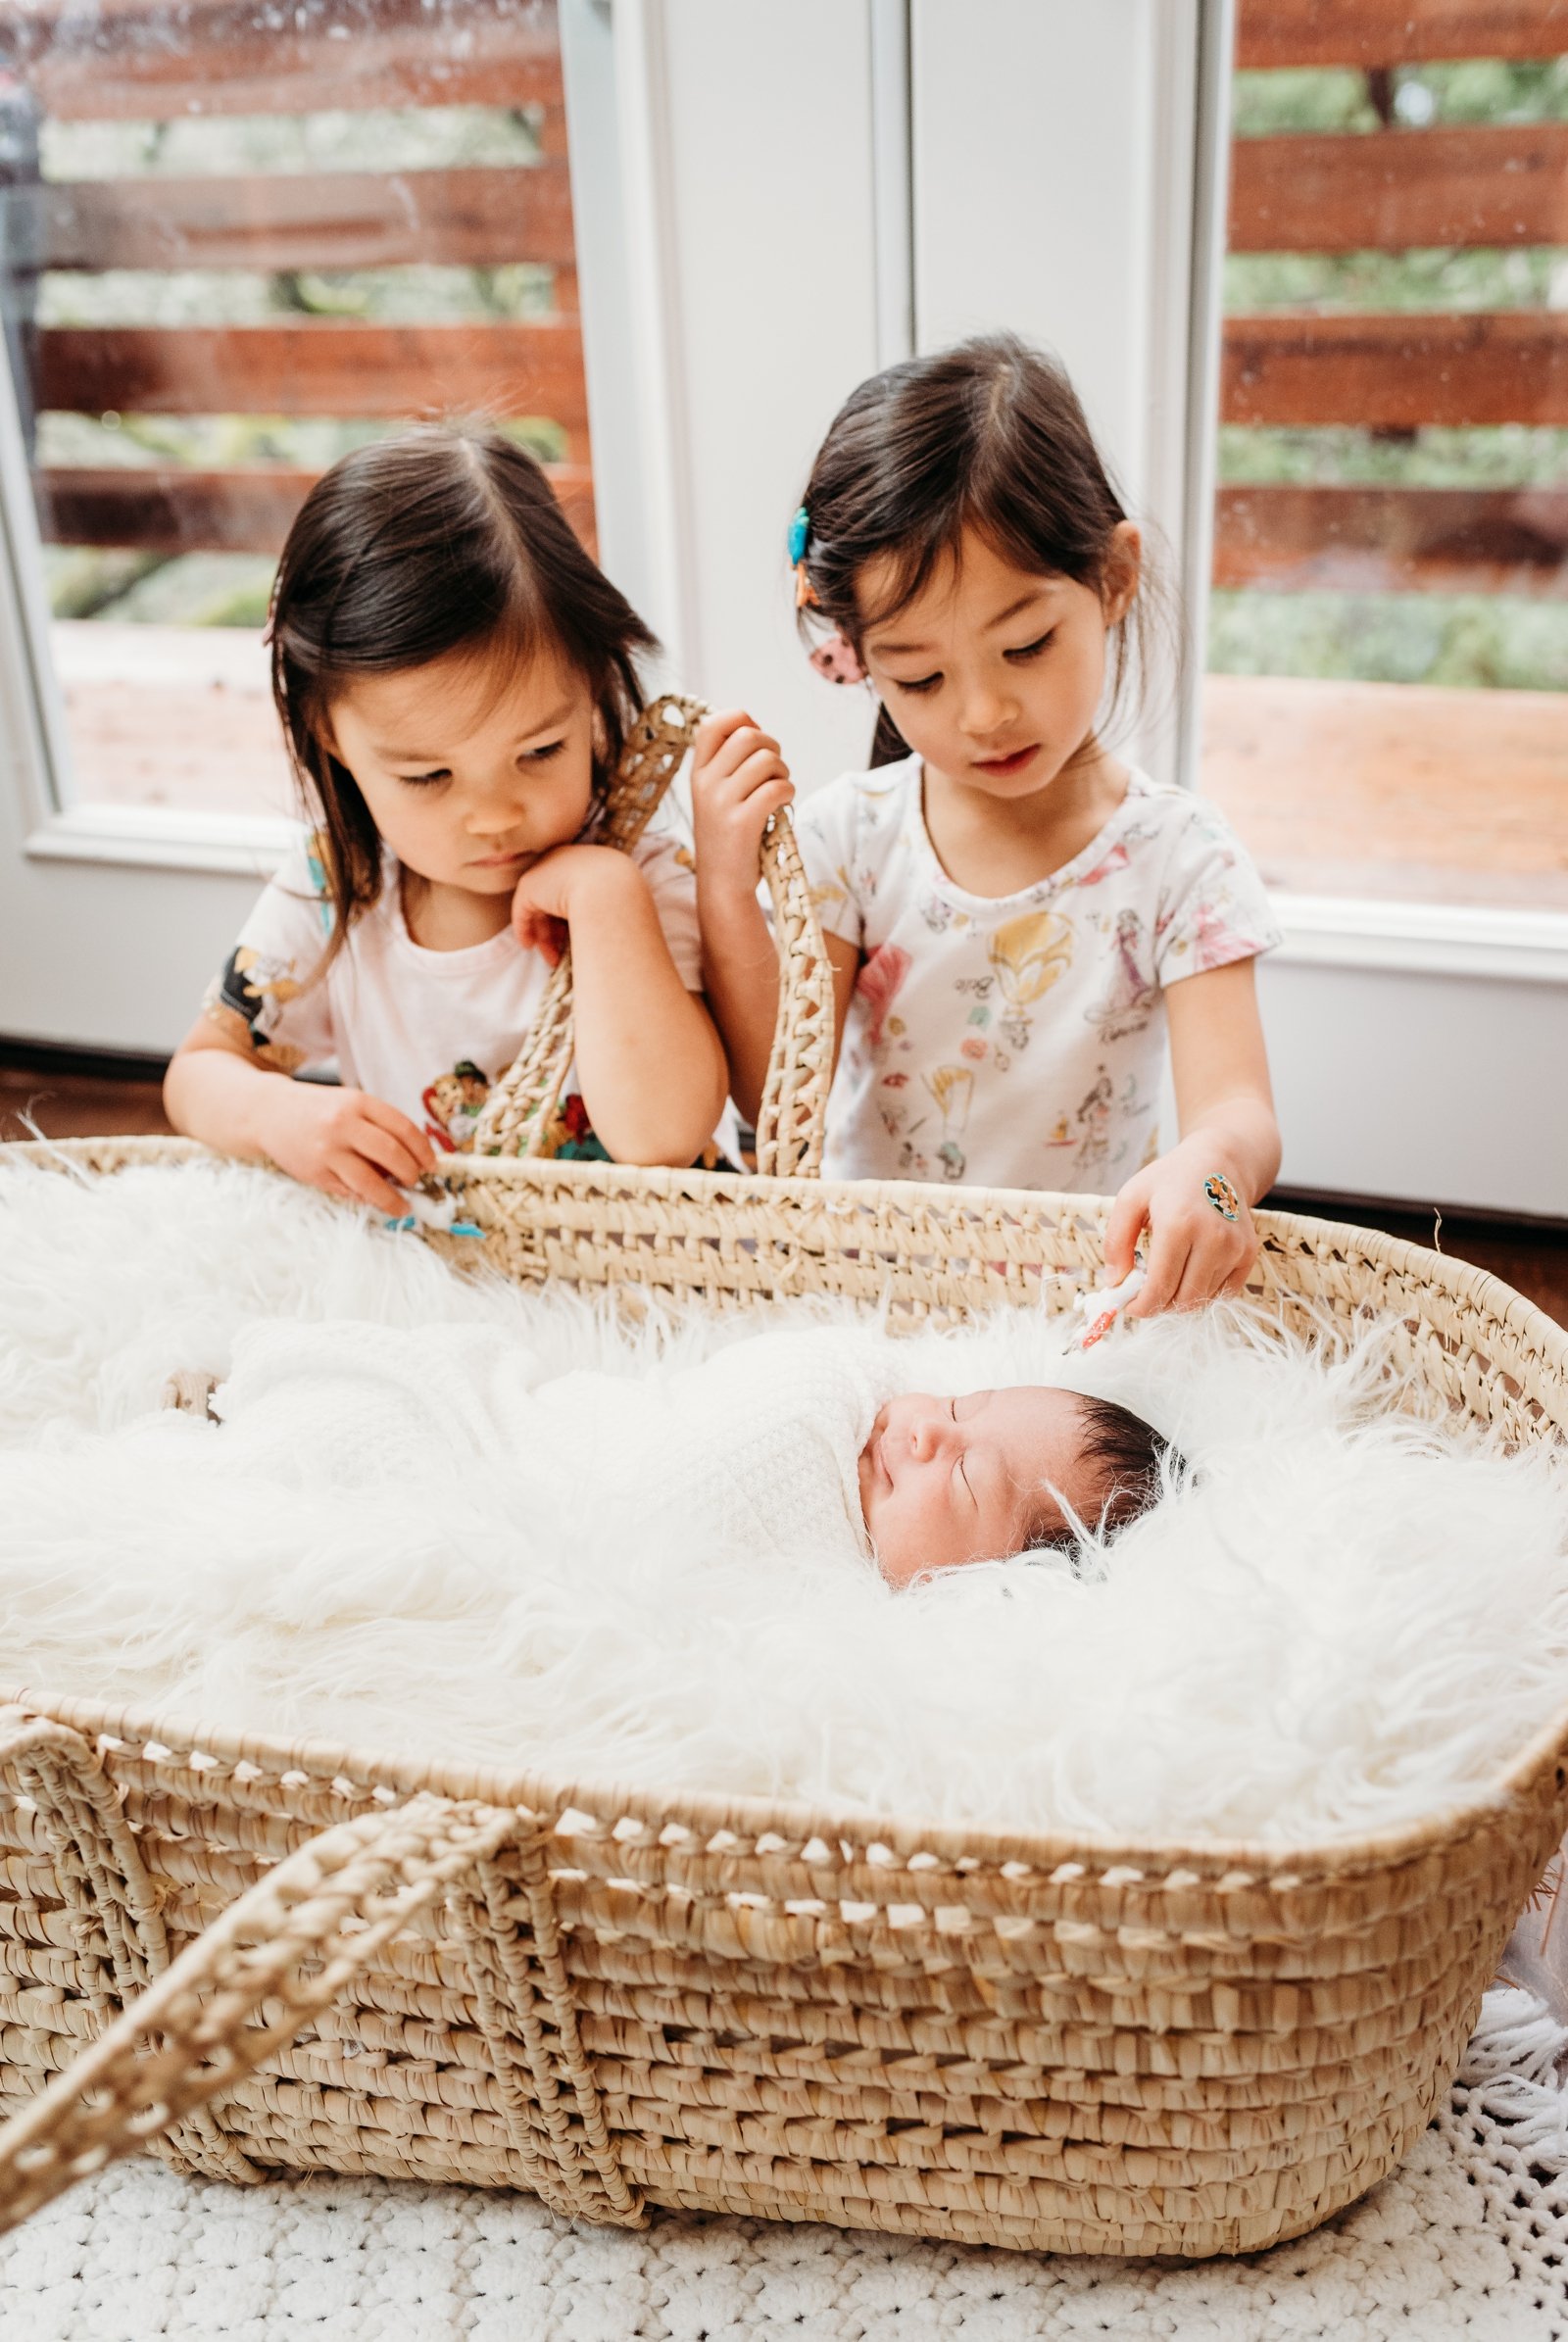 Walnut creek Newborn lifestyle photography at home photoshoot Young Soul Photography East Bay Photographer 28.jpg